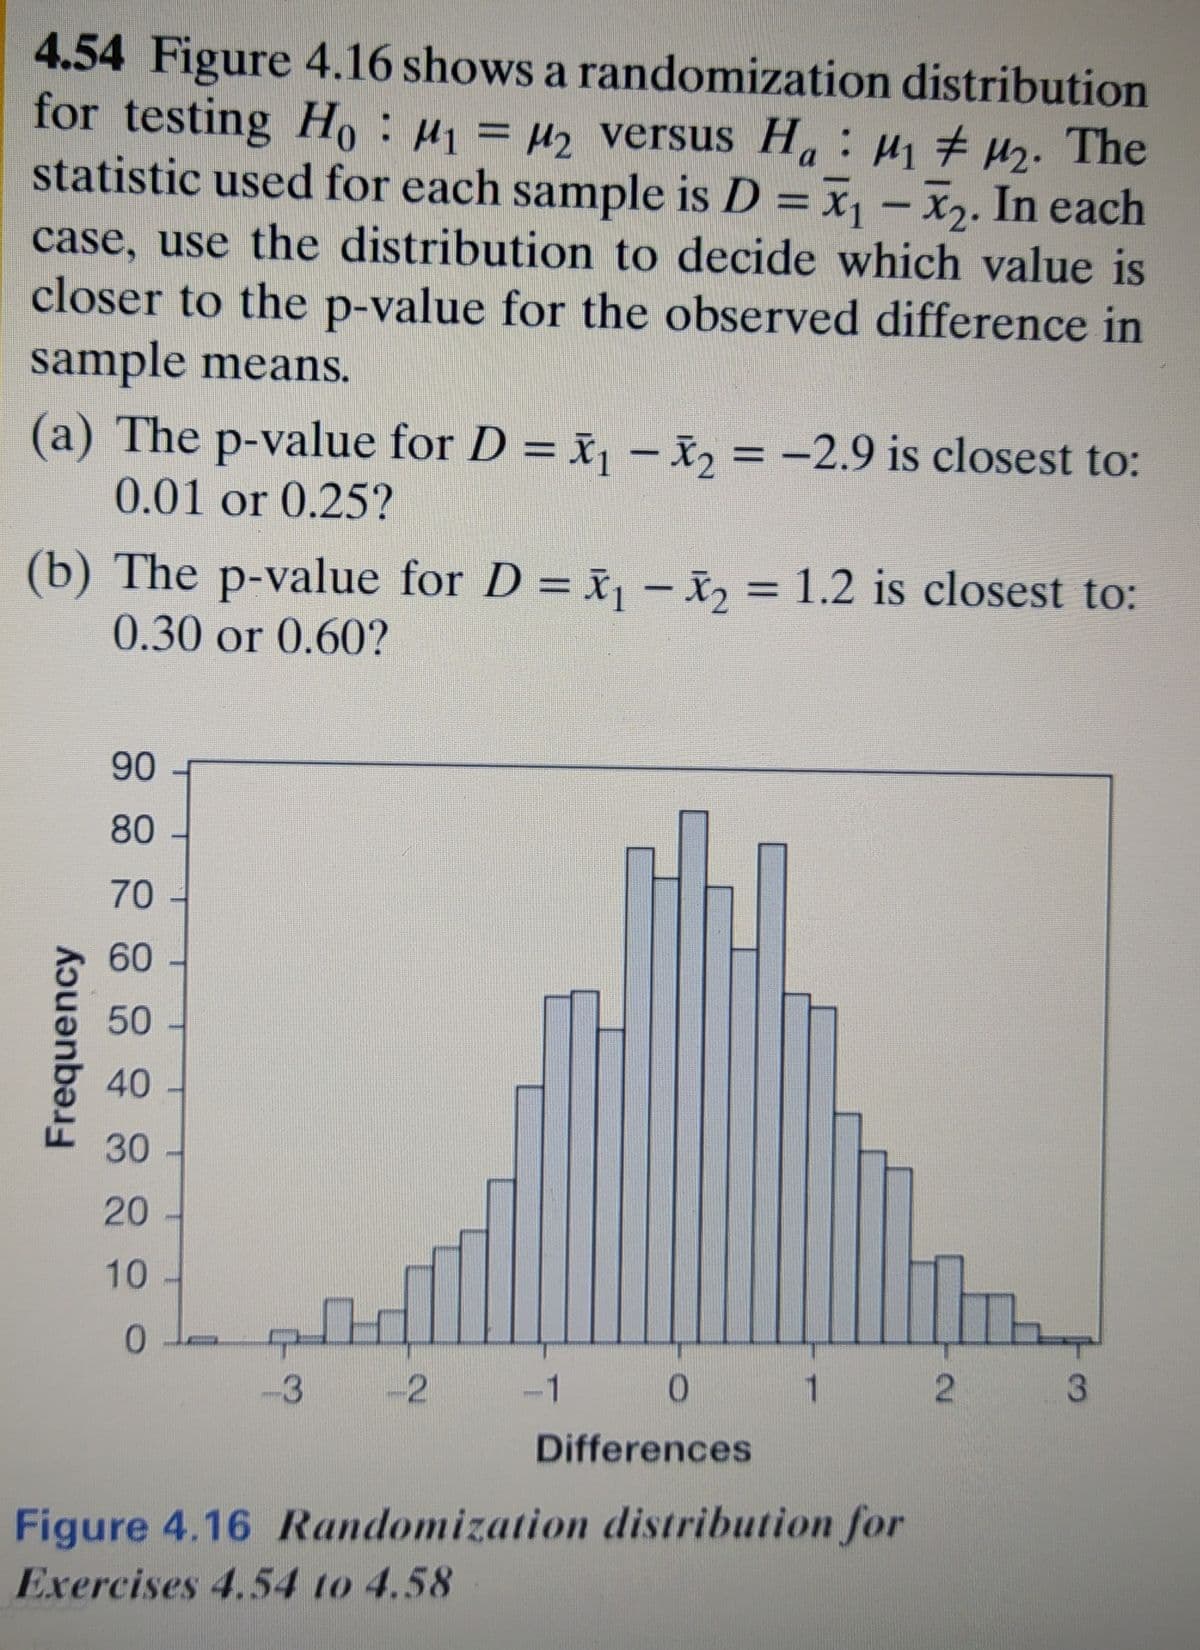 4.54 Figure 4.16 shows a randomization distribution
for testing Ho 1=2 versus Ha
statistic used for each sample is D = x, – x2. In each
case, use the distribution to decide which value is
closer to the p-value for the observed difference in
: H1 # µz. The
sample means.
(a) The p-value for D = x - I = -2.9 is closest to:
%3D
0.01 or 0.25?
(b) The p-value for D = x, – x, = 1.2 is closest to:
%3D
0.30 or 0.60?
90
80
70
60
50
40
30
20
10
무
-3
-2
-1
1 2 3
Differences
Figure 4.16 Randomization distribution for
Exercises 4.54 to 4.58
Frequency
